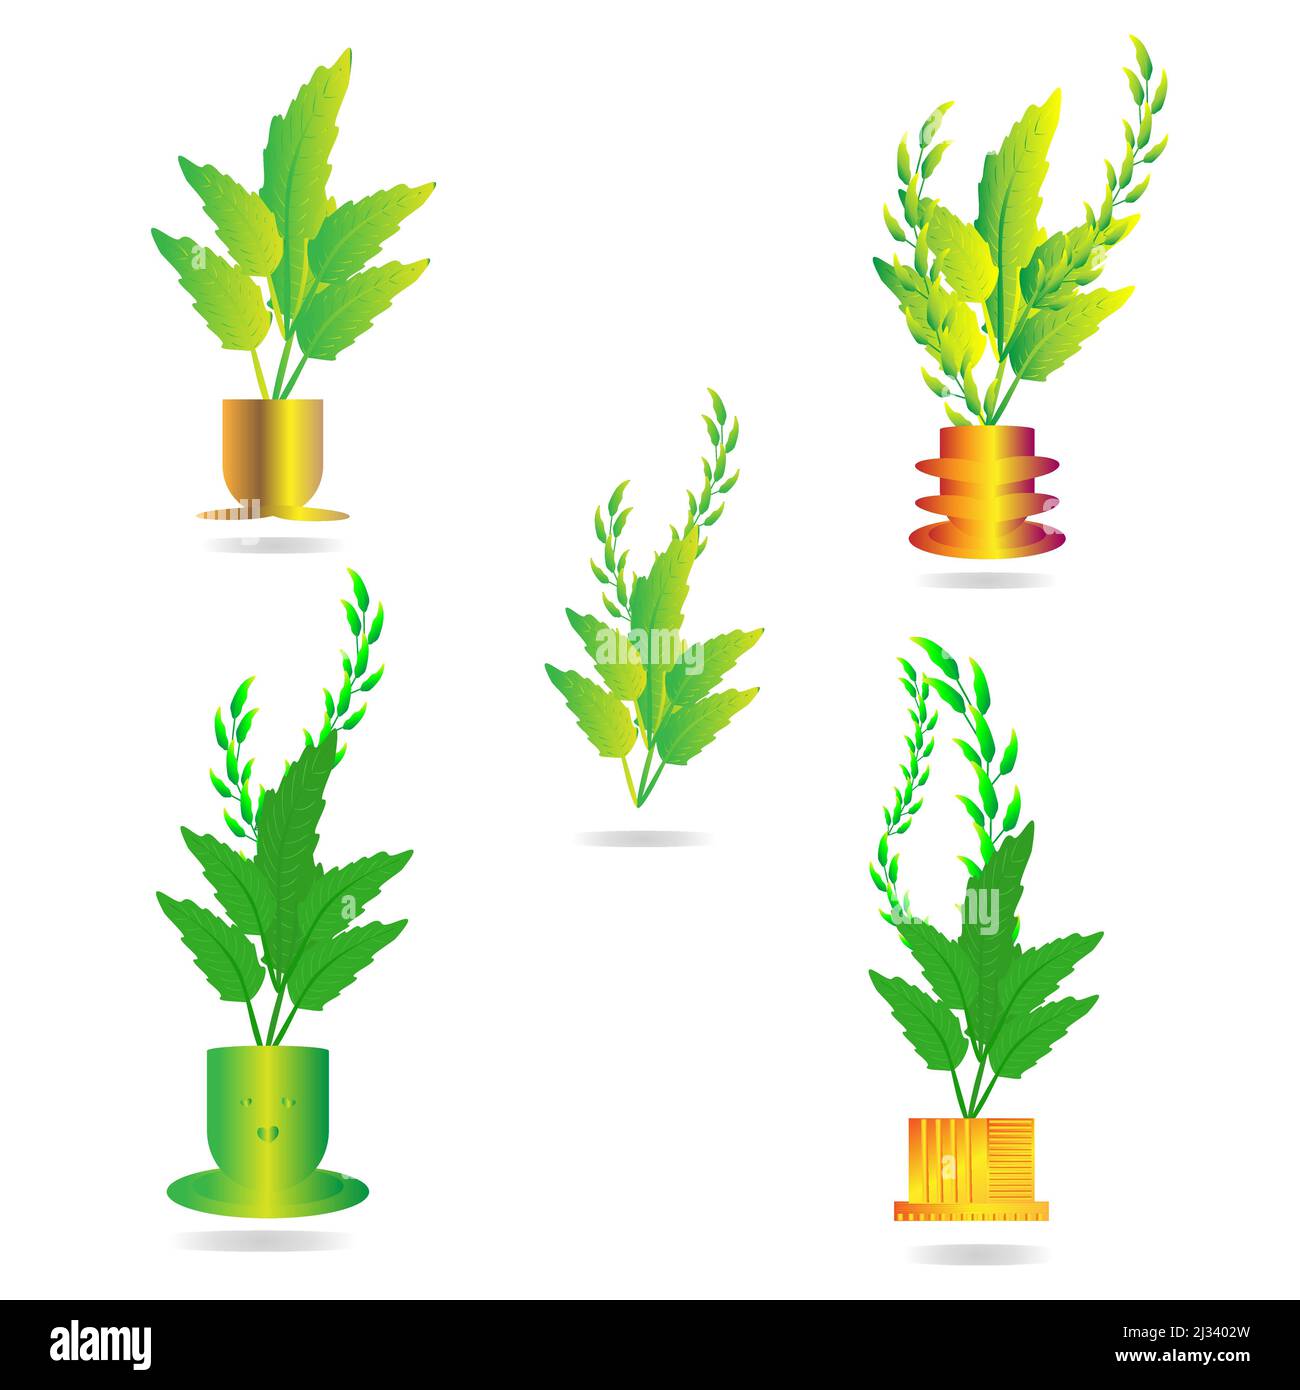 Flowers plants leaf  icon ornament decoration abstract background wallpaper art graphic design pattern vector illustration Stock Vector